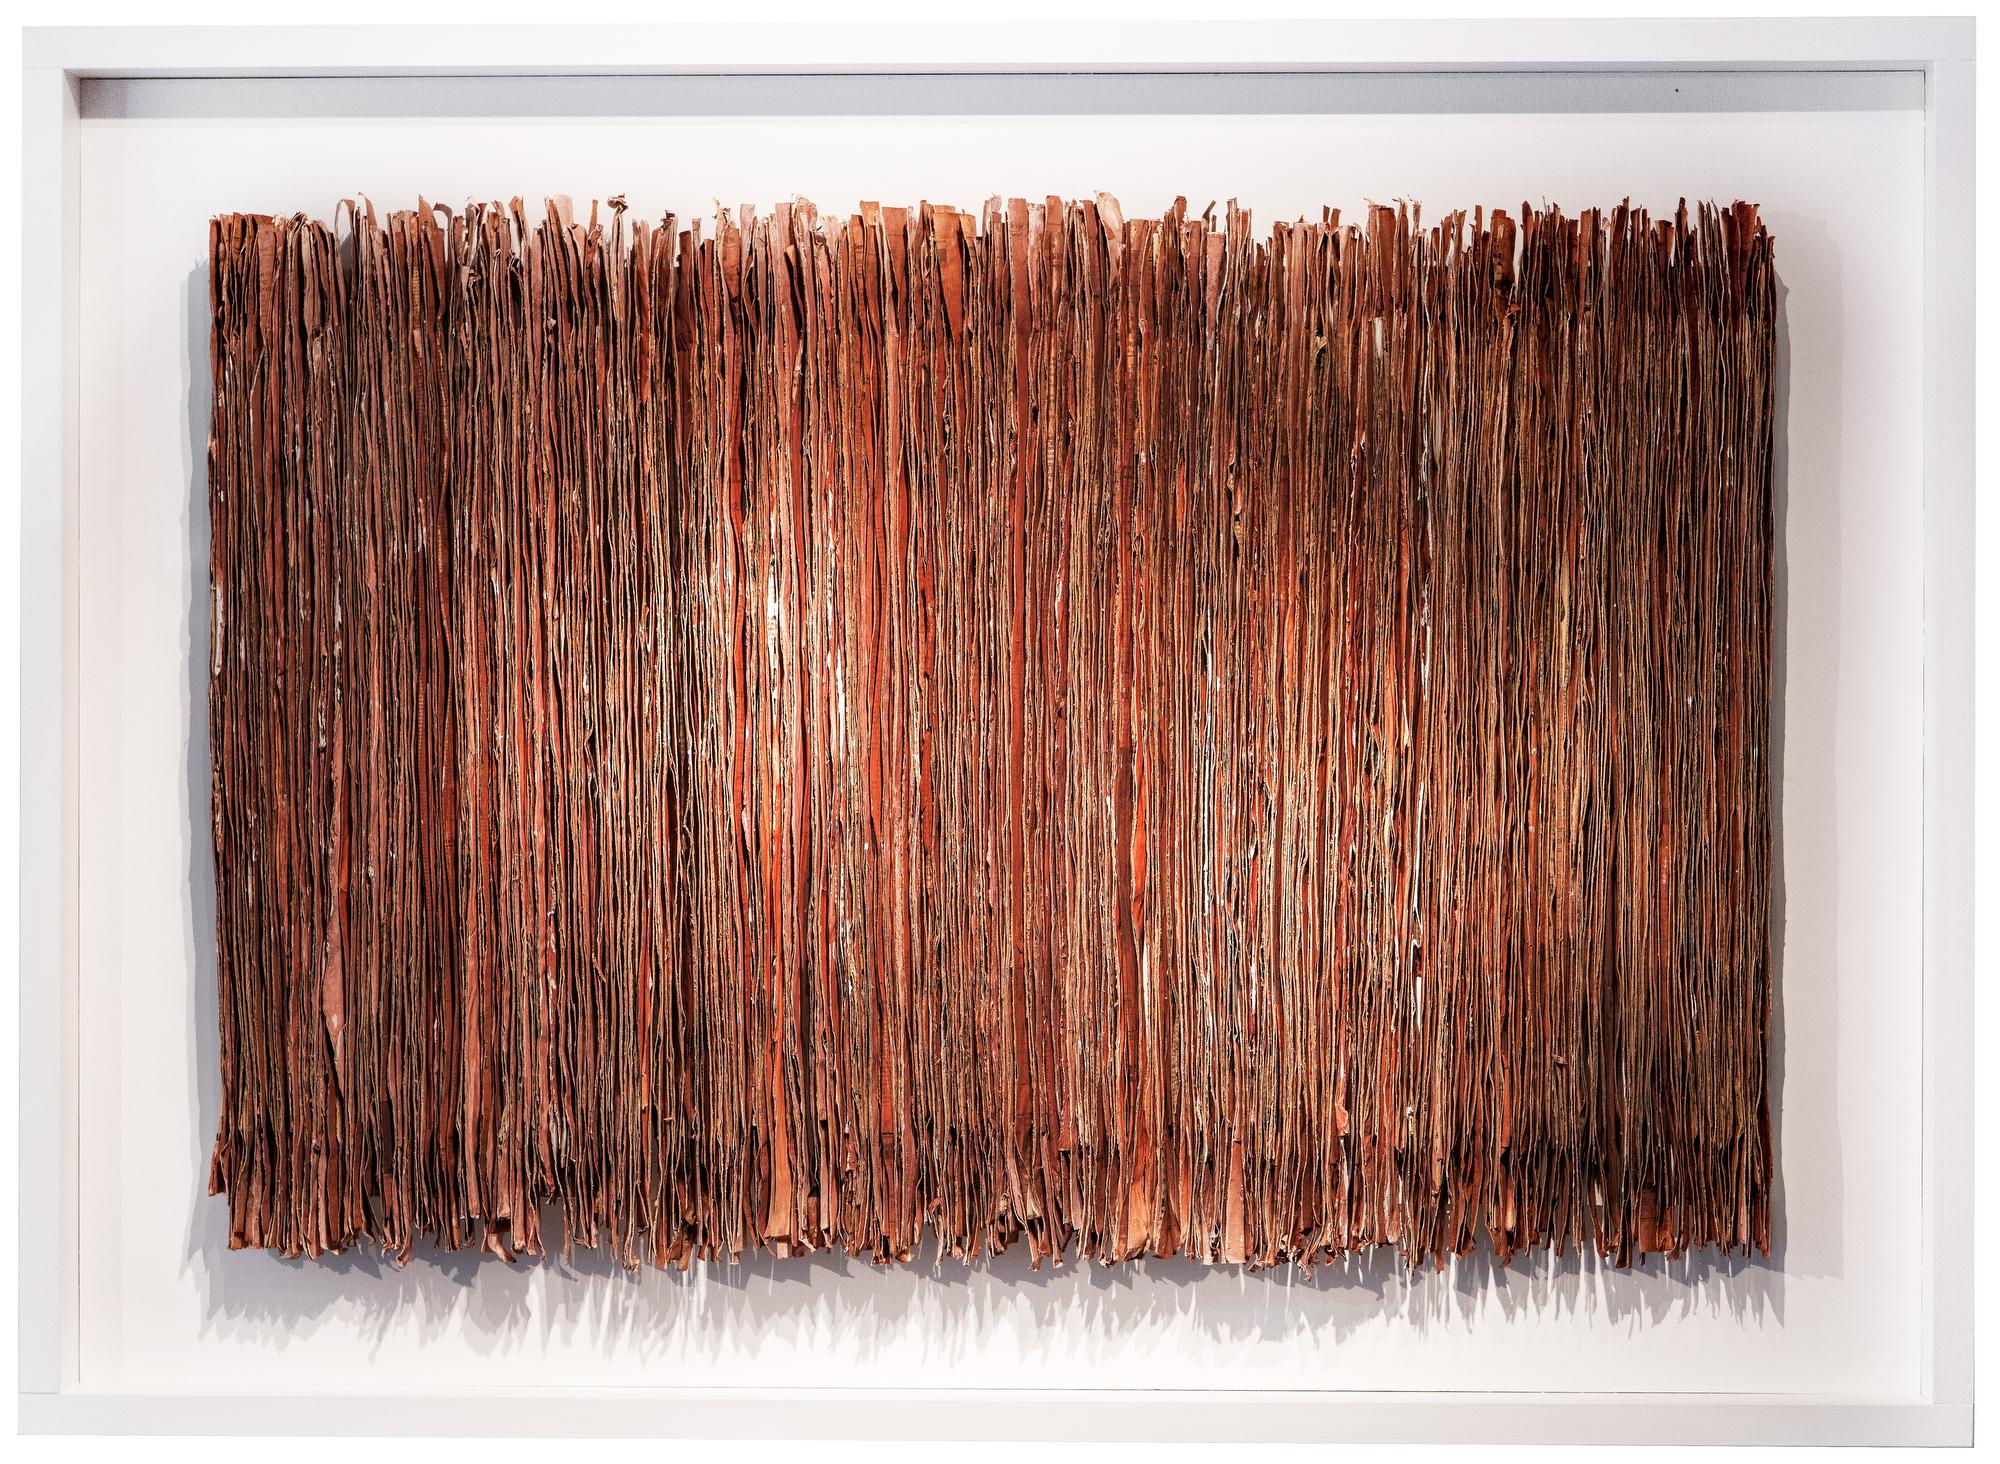 Large Contemporary Paper Assemblage In Warm Maroon Brown Color By Bo SällStröm - Mixed Media Art by Bo Sällström